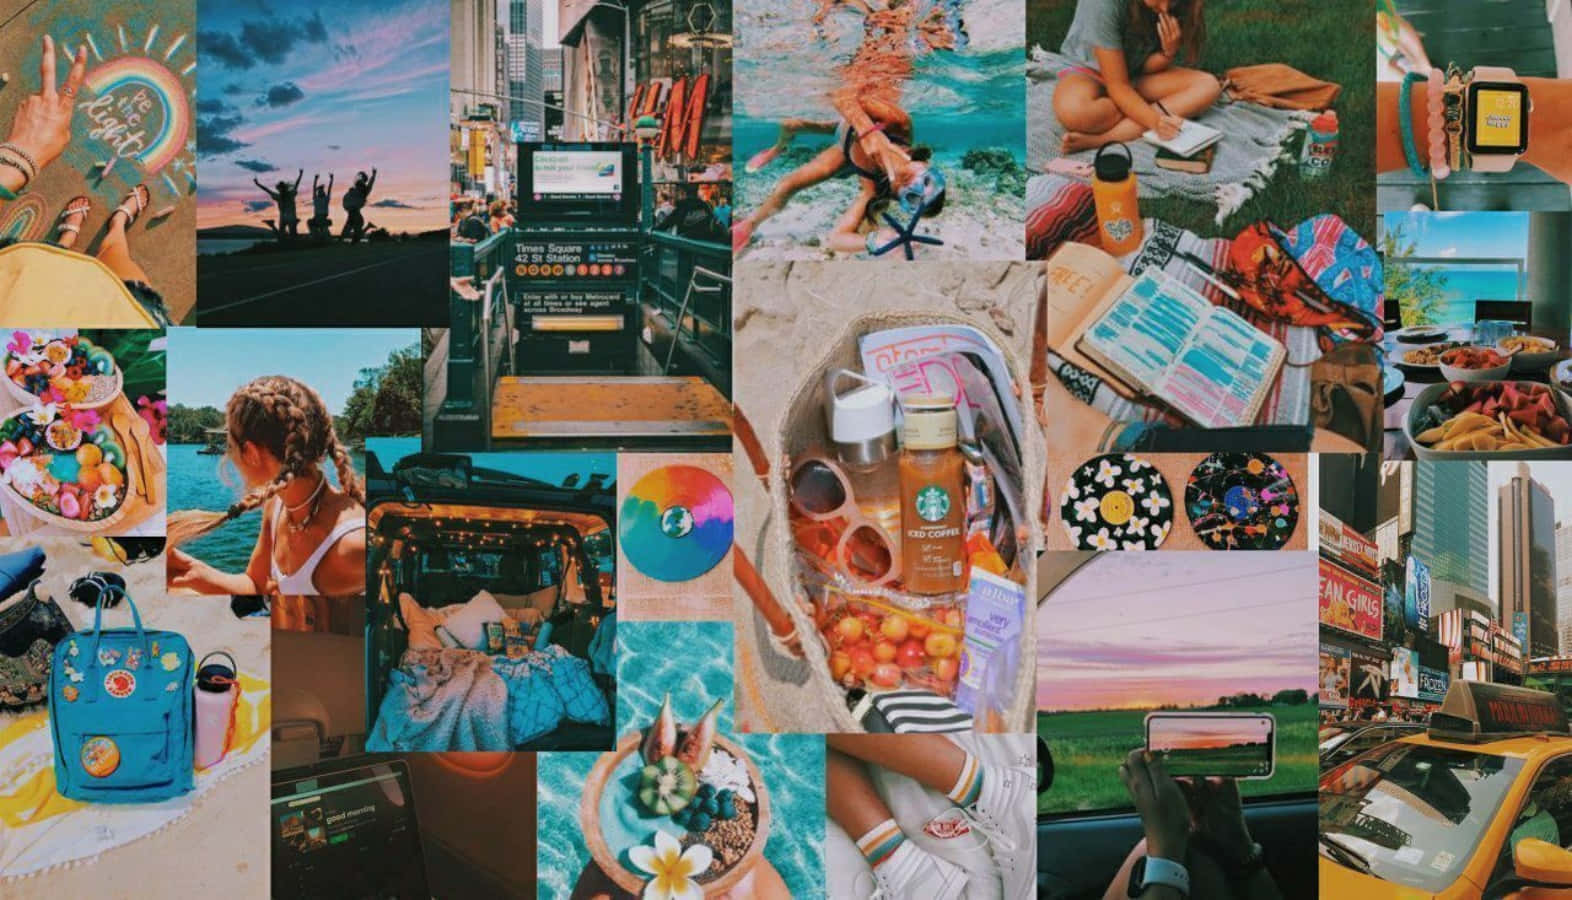 Stay productive and enjoy Summer with this aesthetic laptop! Wallpaper